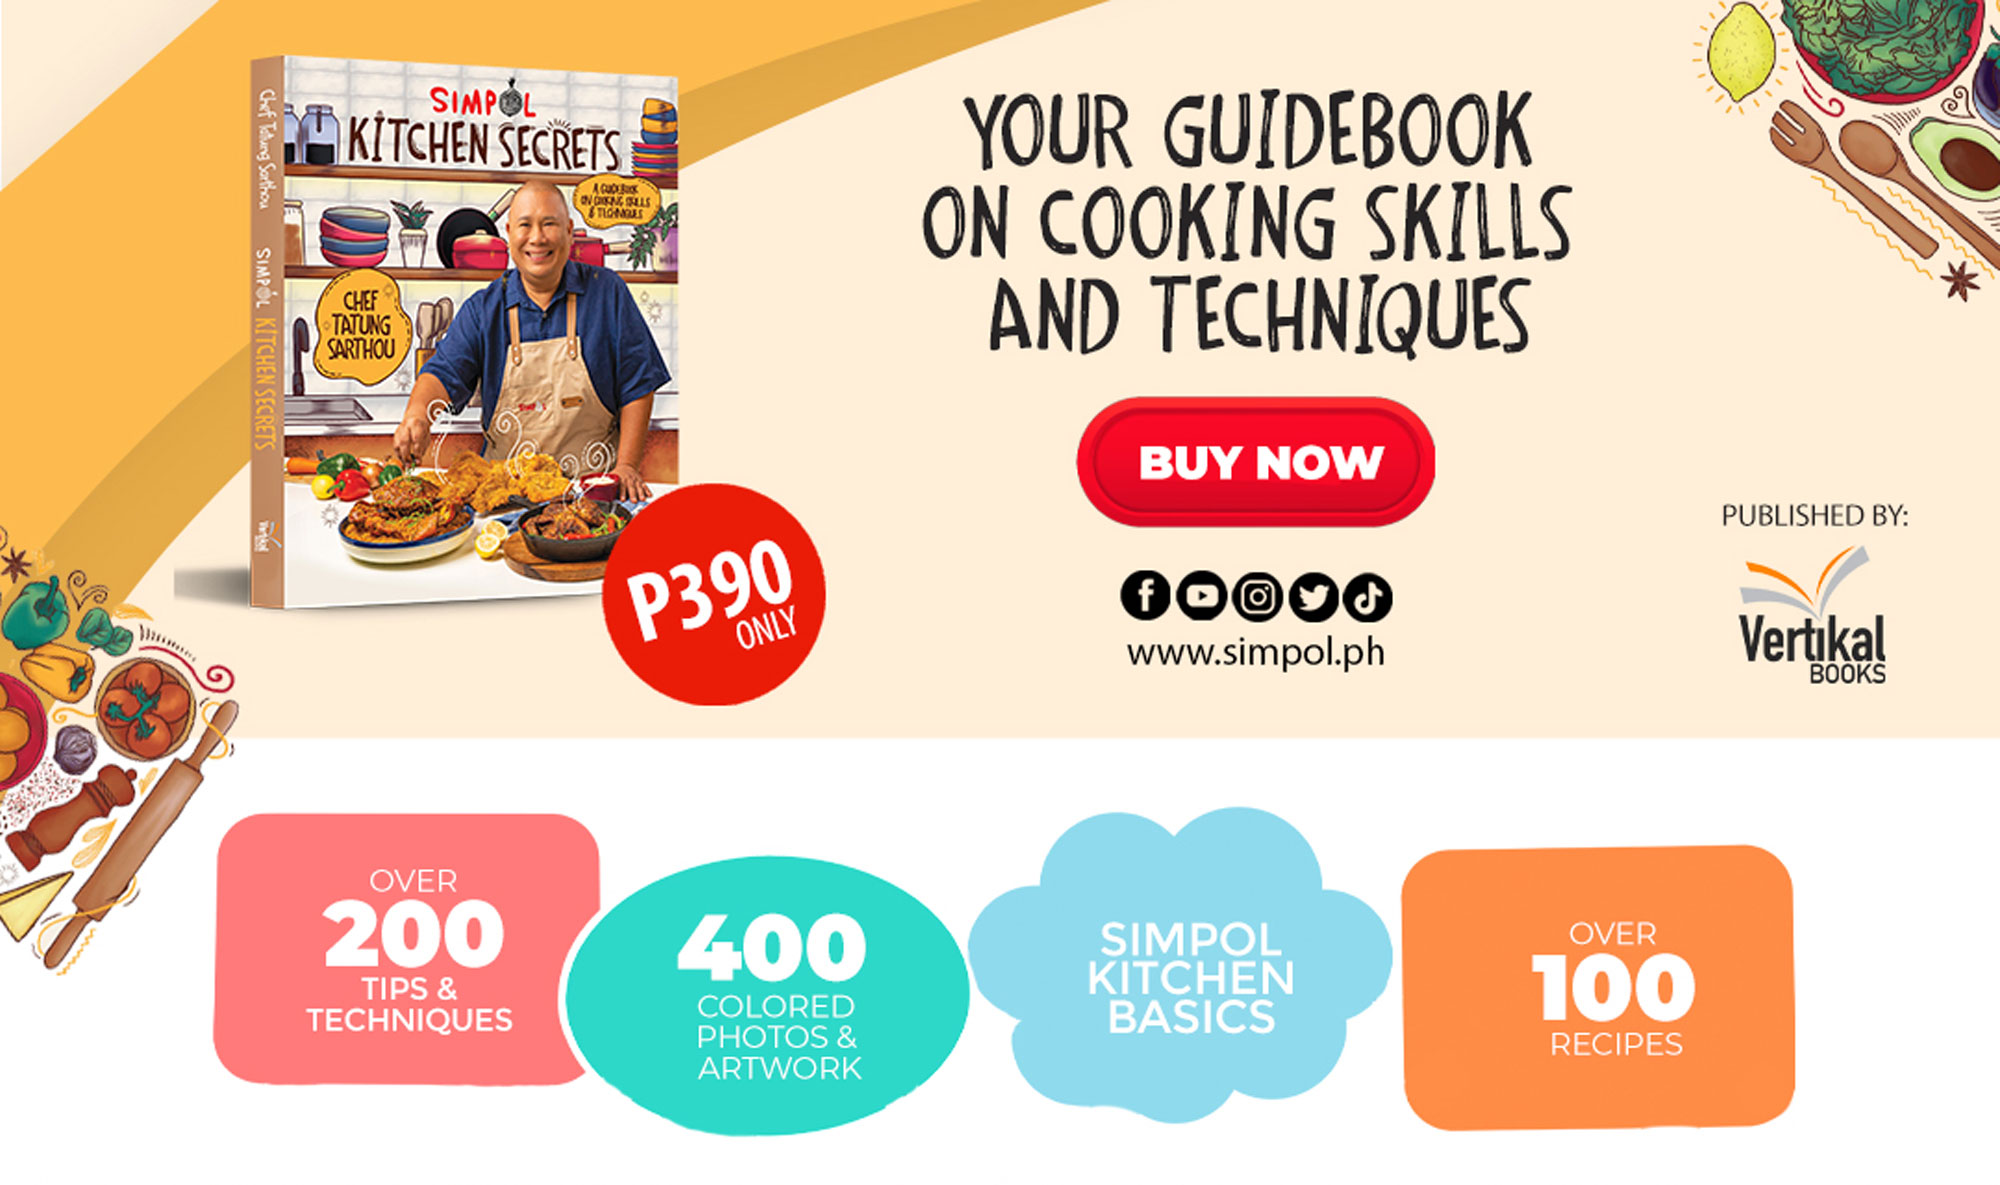 Your Guidebook on cooking skills and technique